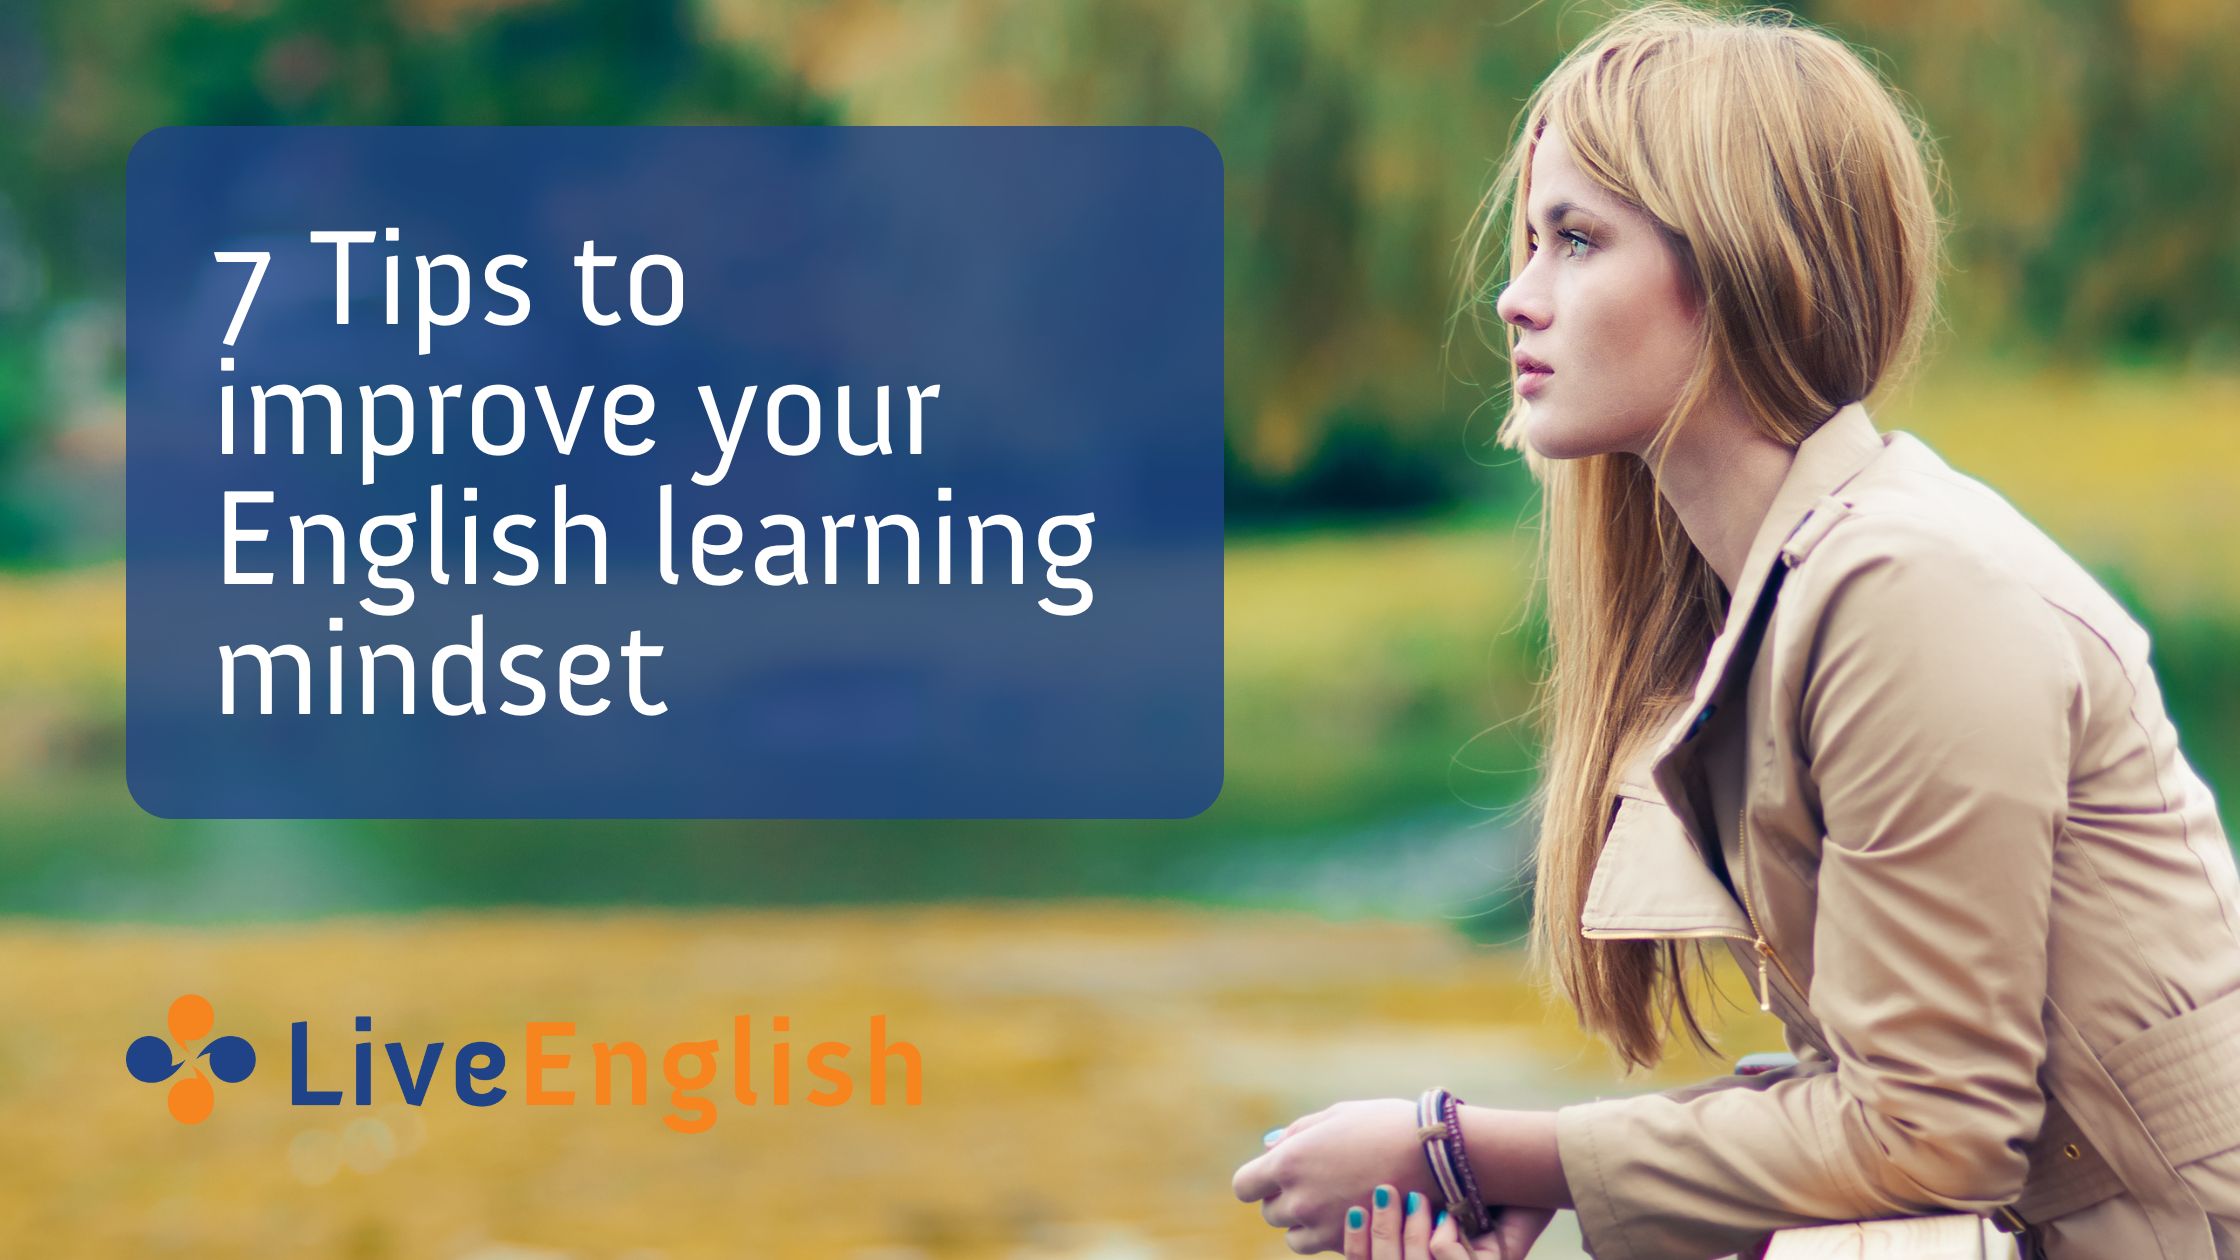 Learn all you need to know with our English-speaking courses